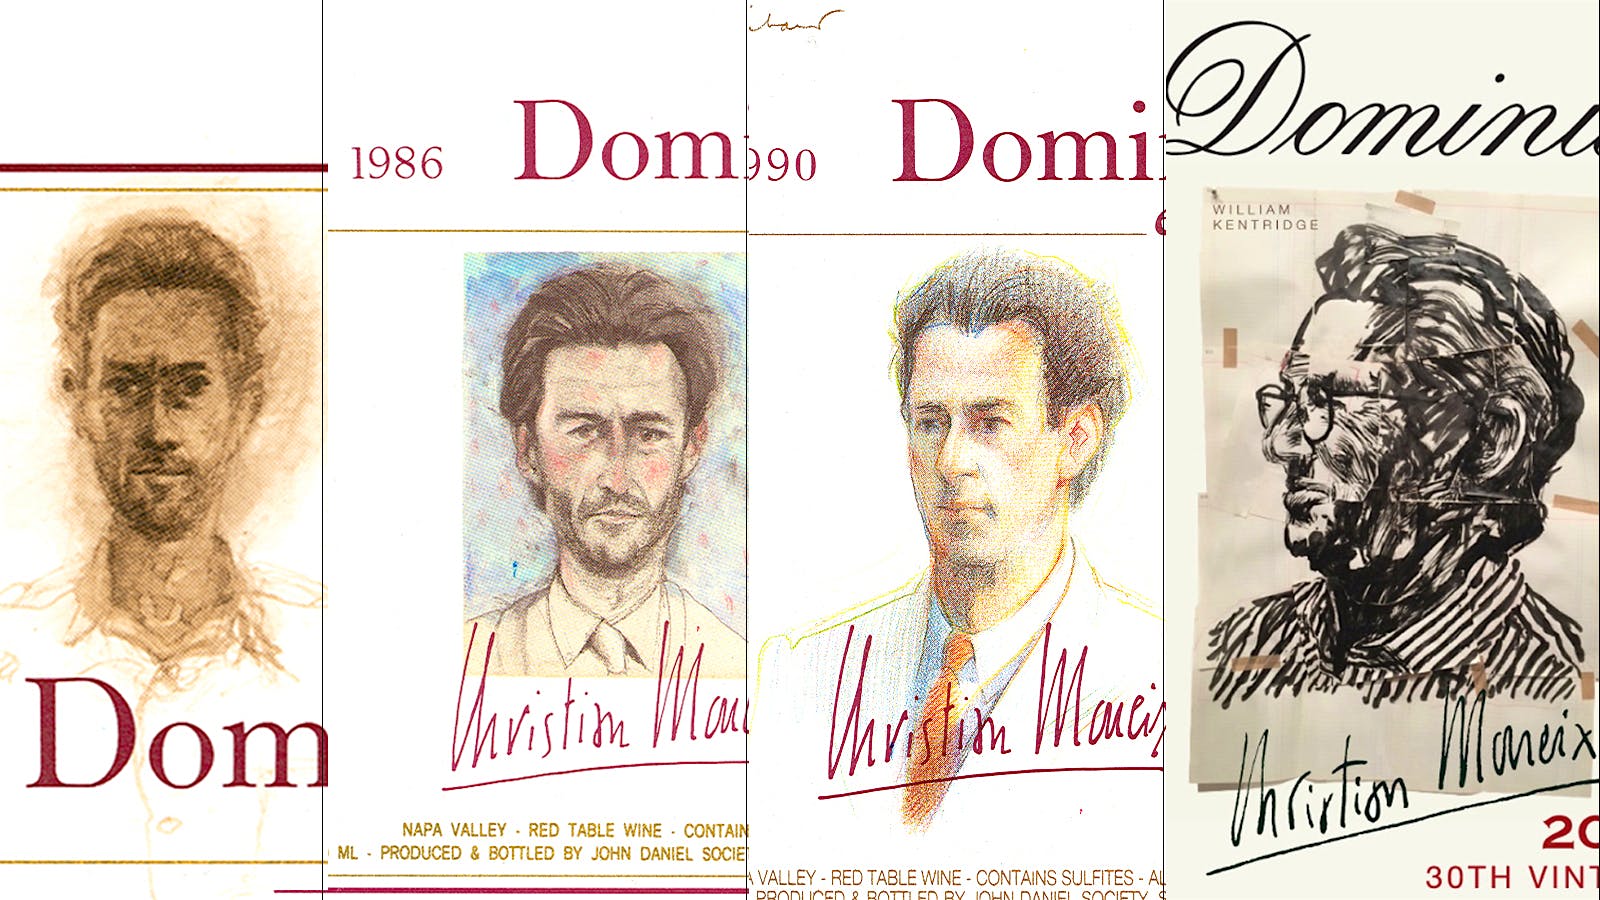 Christian Moueix: 30 Years as the Face of Dominus